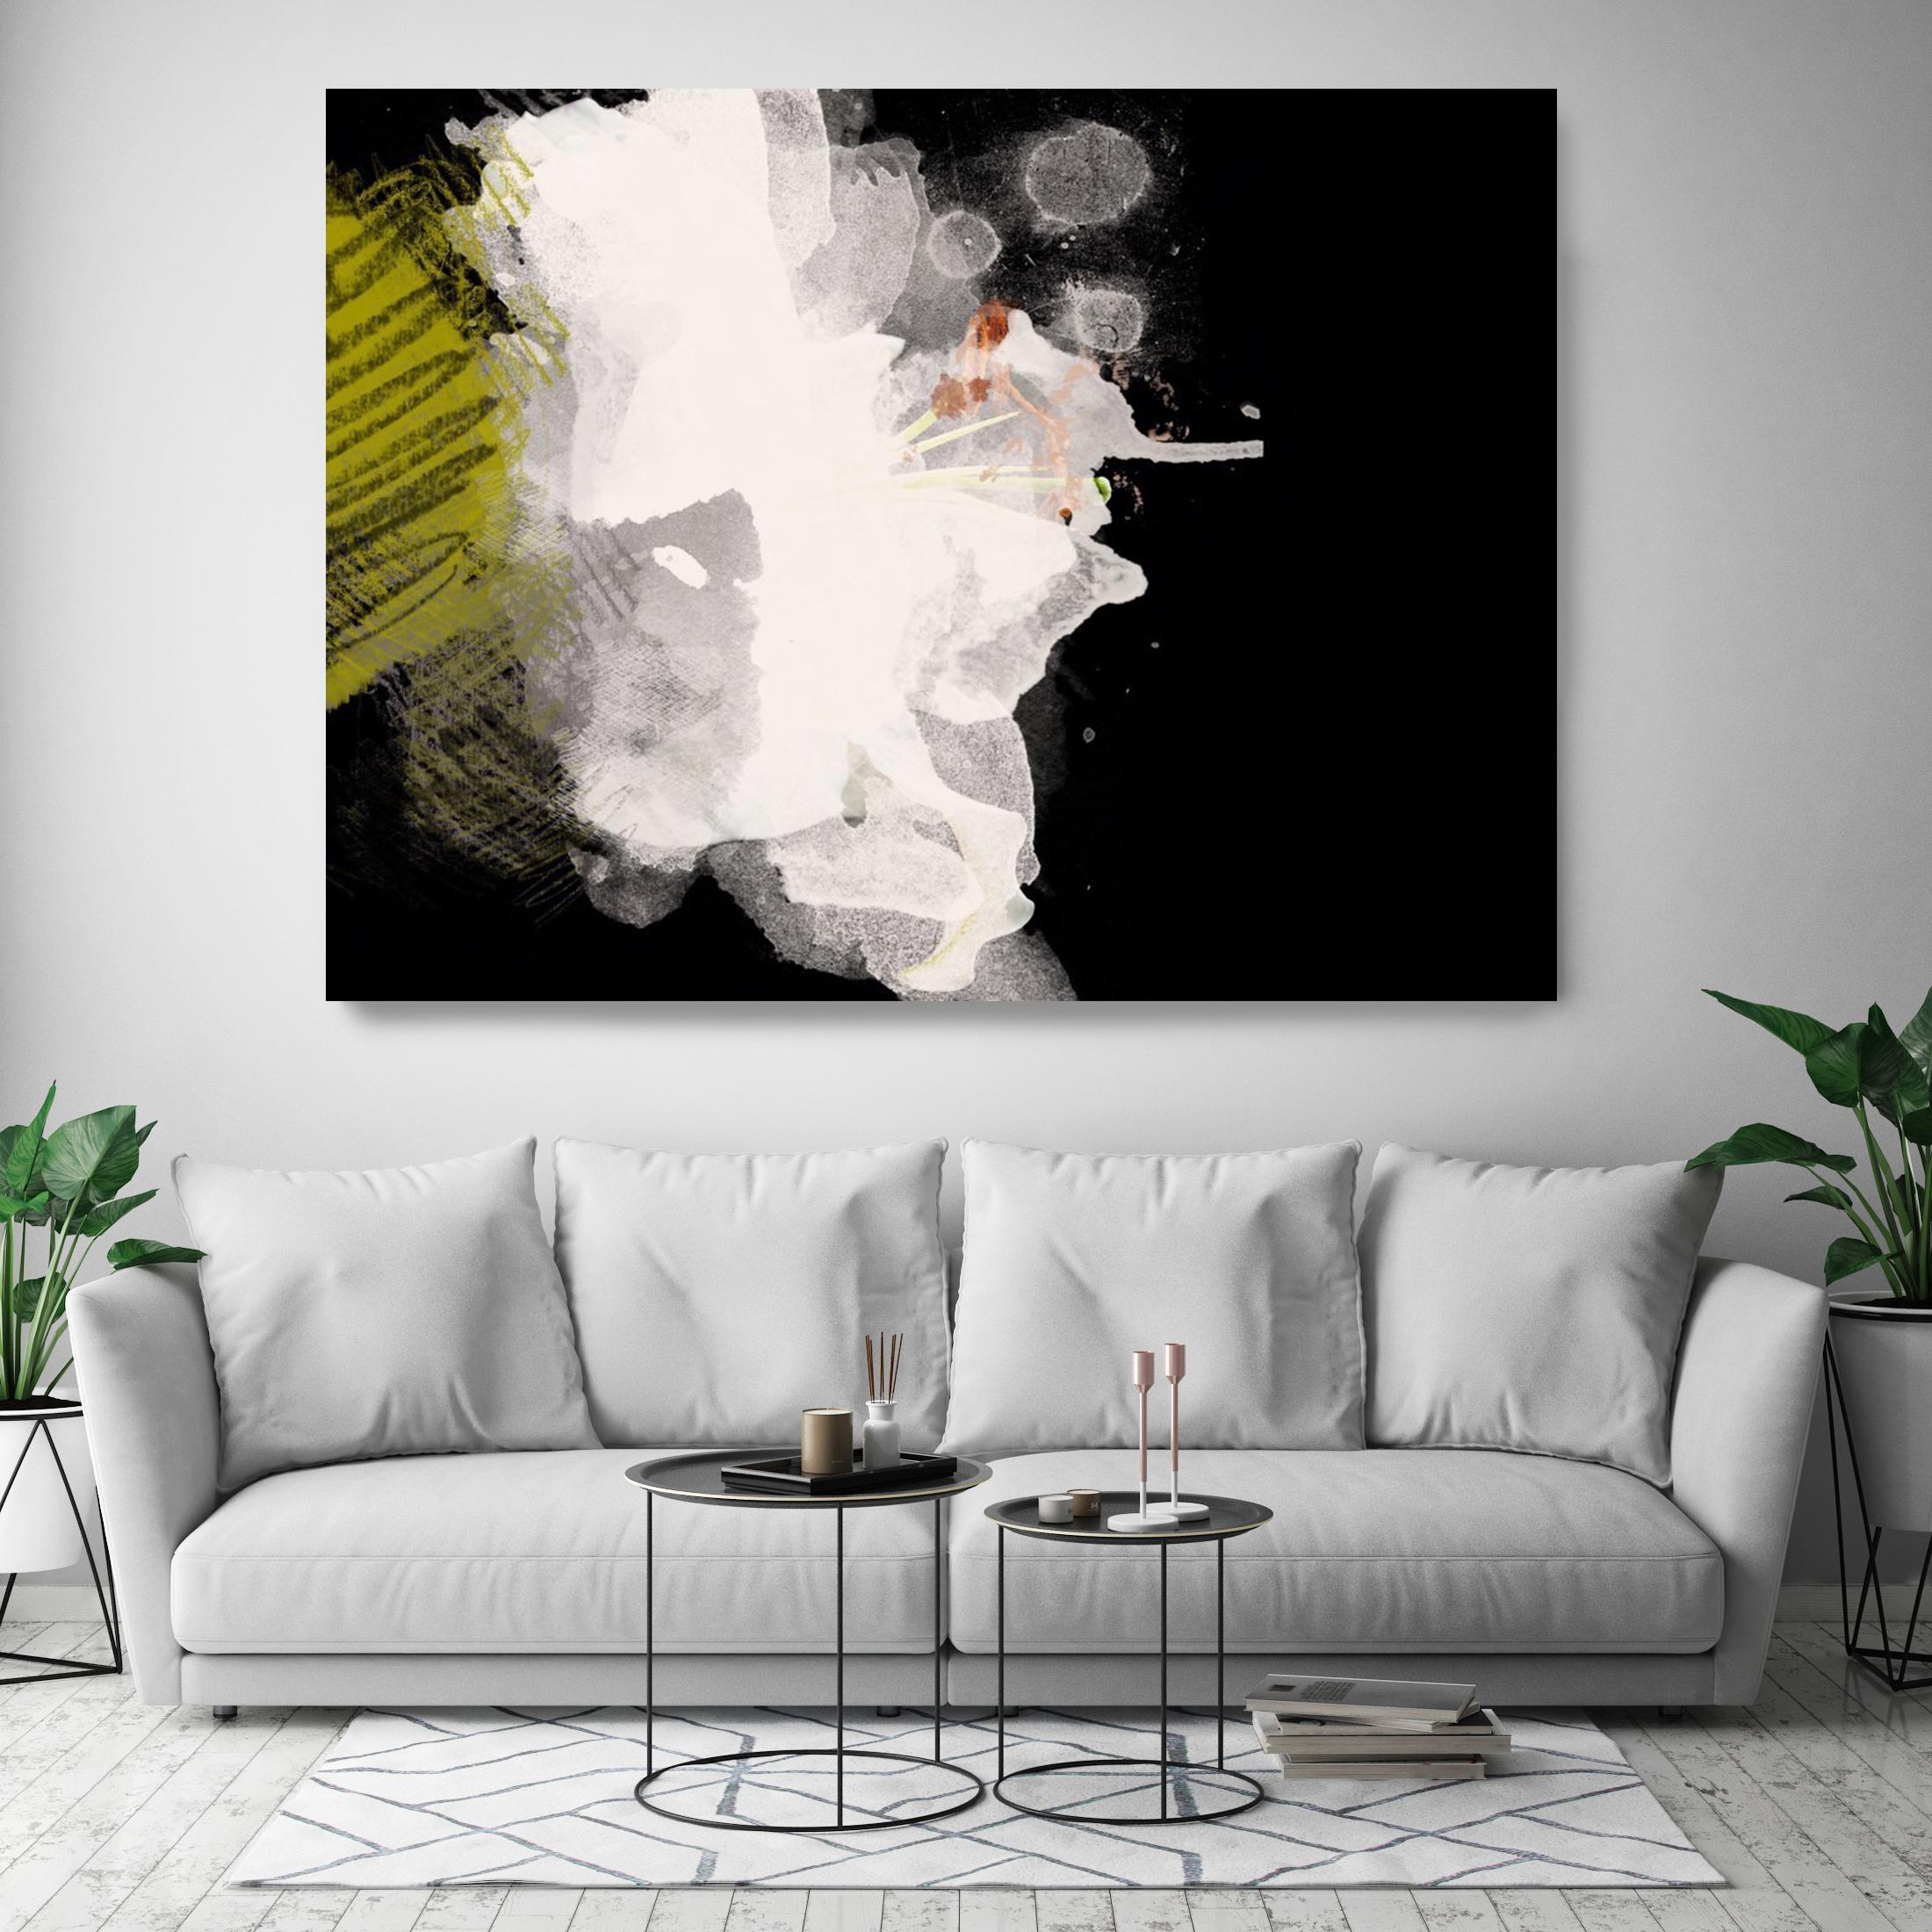 White and Black Floral Painting Hand Embellished Giclee on Canvas 40H X 60W

State-of-the-art HAND EMBELLISHED ∽ MUSEUM QUALITY ∽ DISPLAY READY Giclee Reproduction
Each limited edition Giclee is hand embellished by the artist, making it one of a